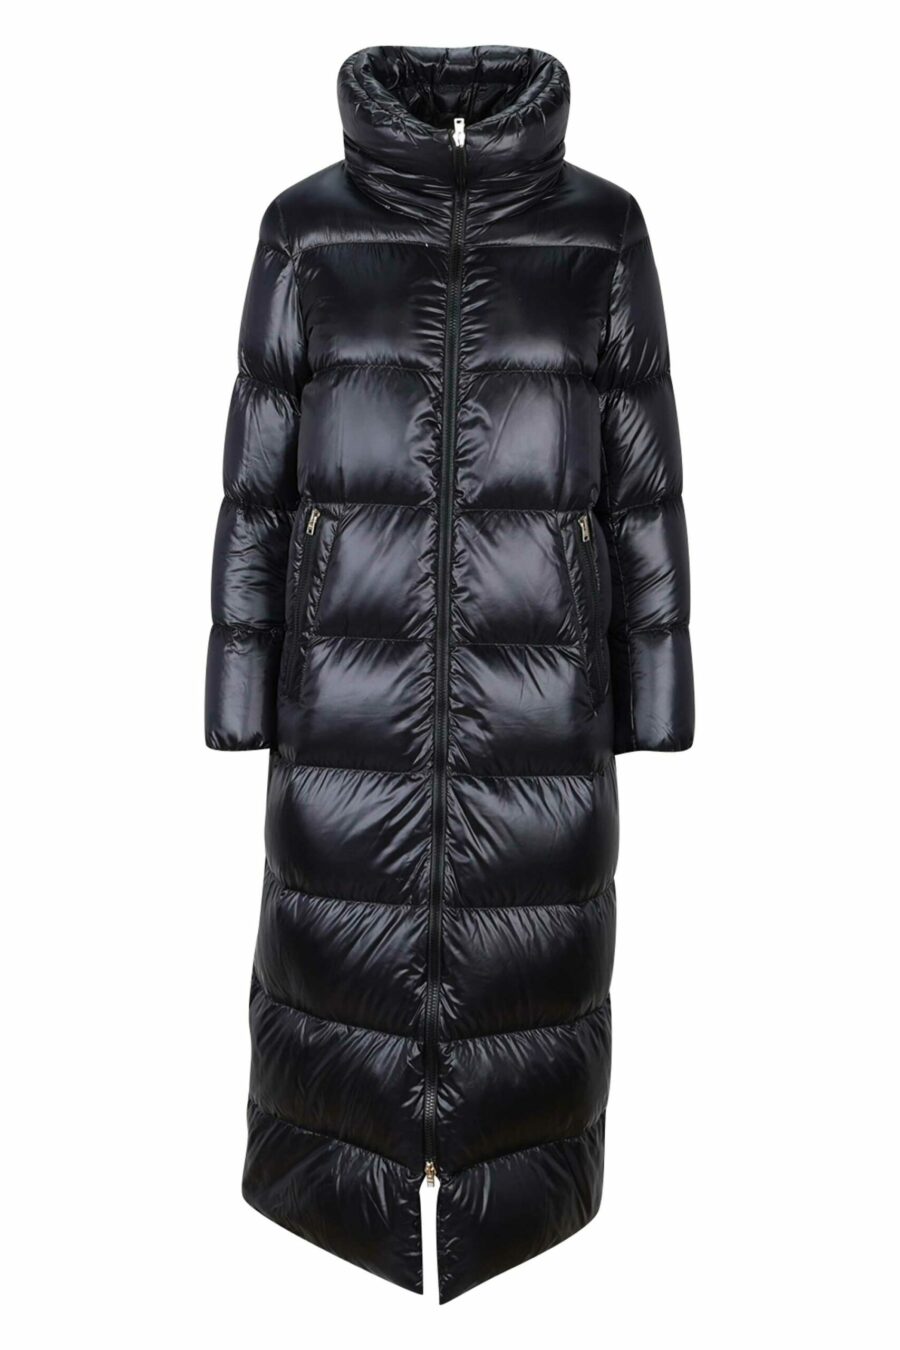 Long black quilted quilted jacket with straight lines - 8055721802237 scaled